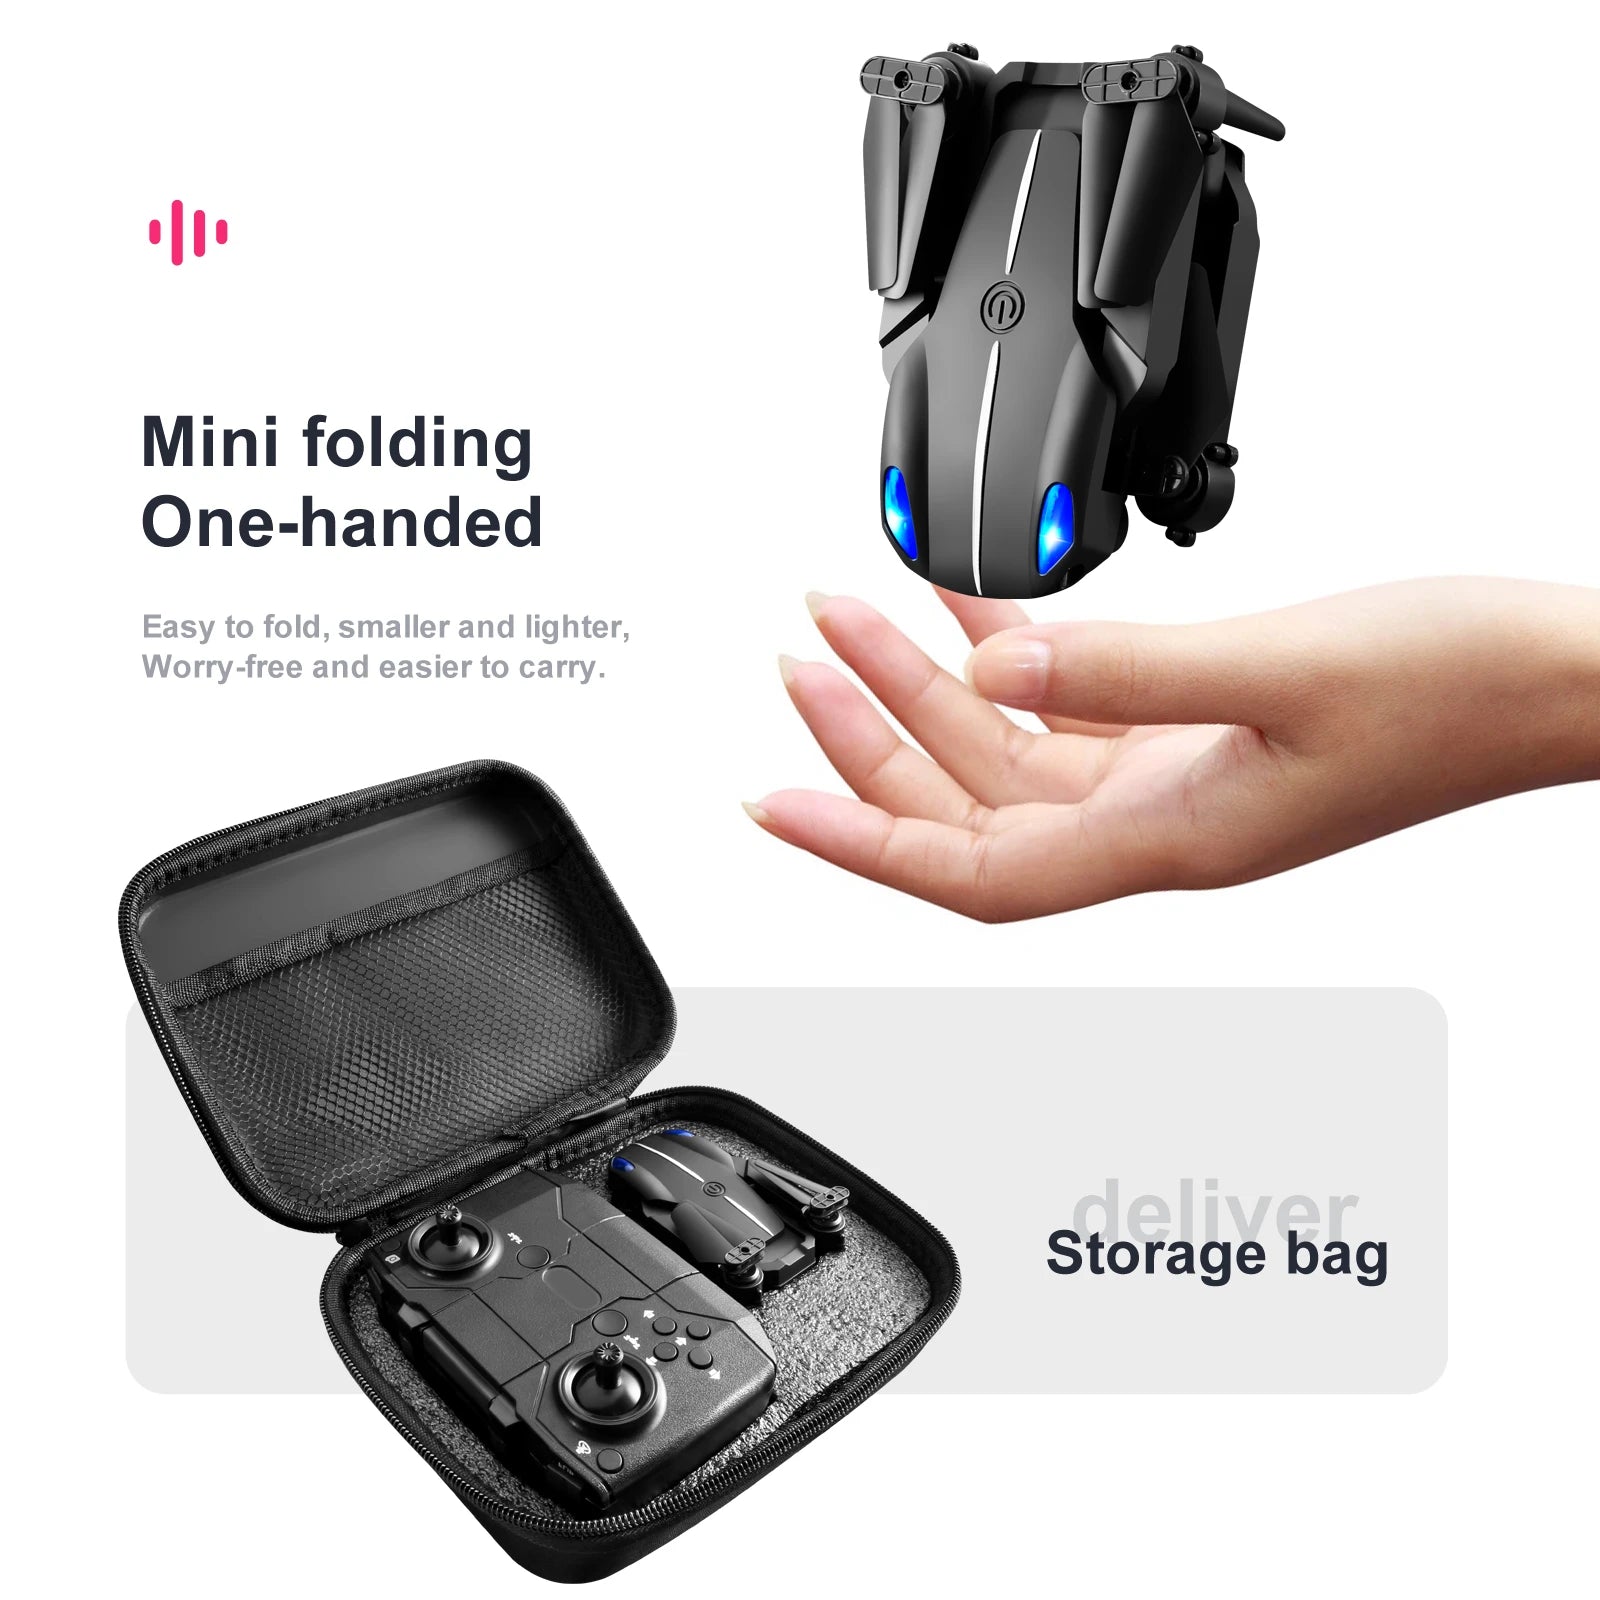 mini folding one-handed easy to fold, smaller and lighter, worry